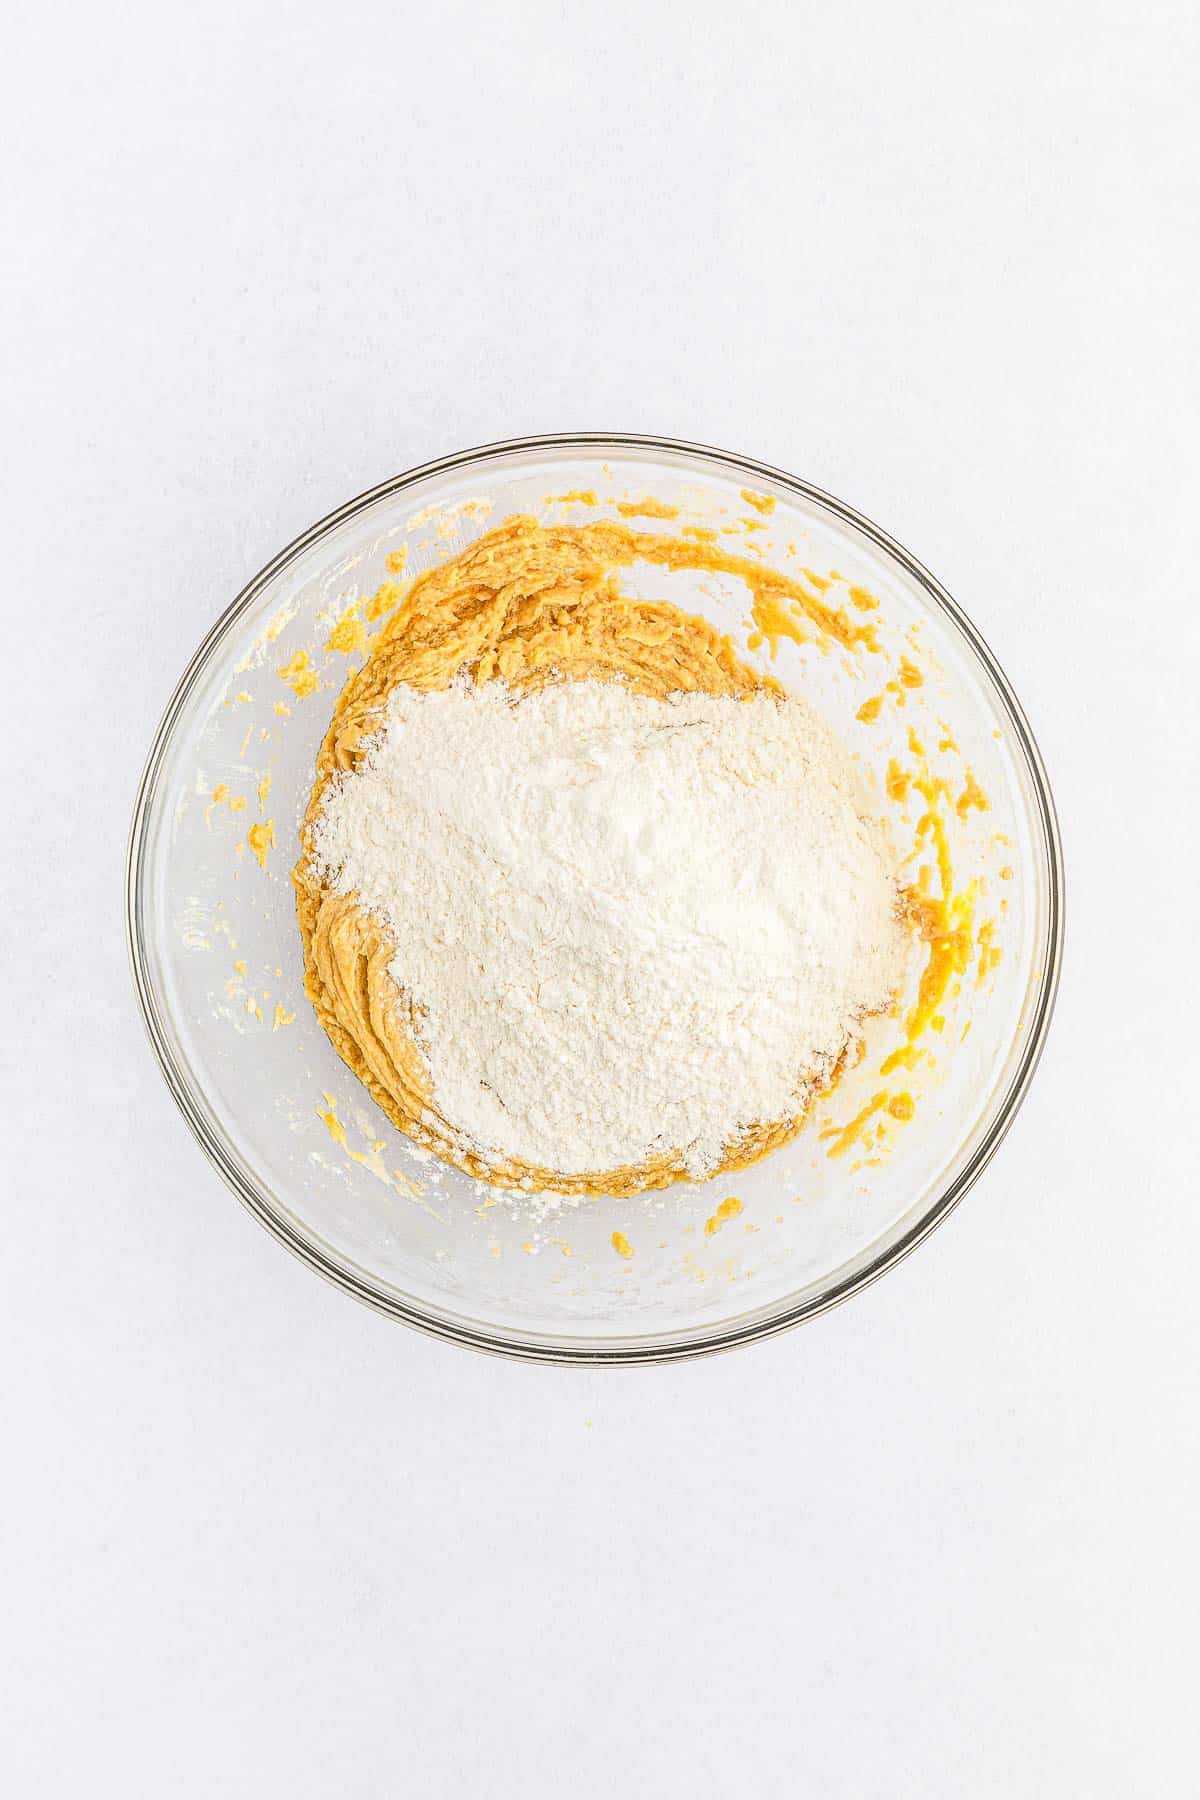 glass mixing bowl with flour on top of sugar and butter mixture.